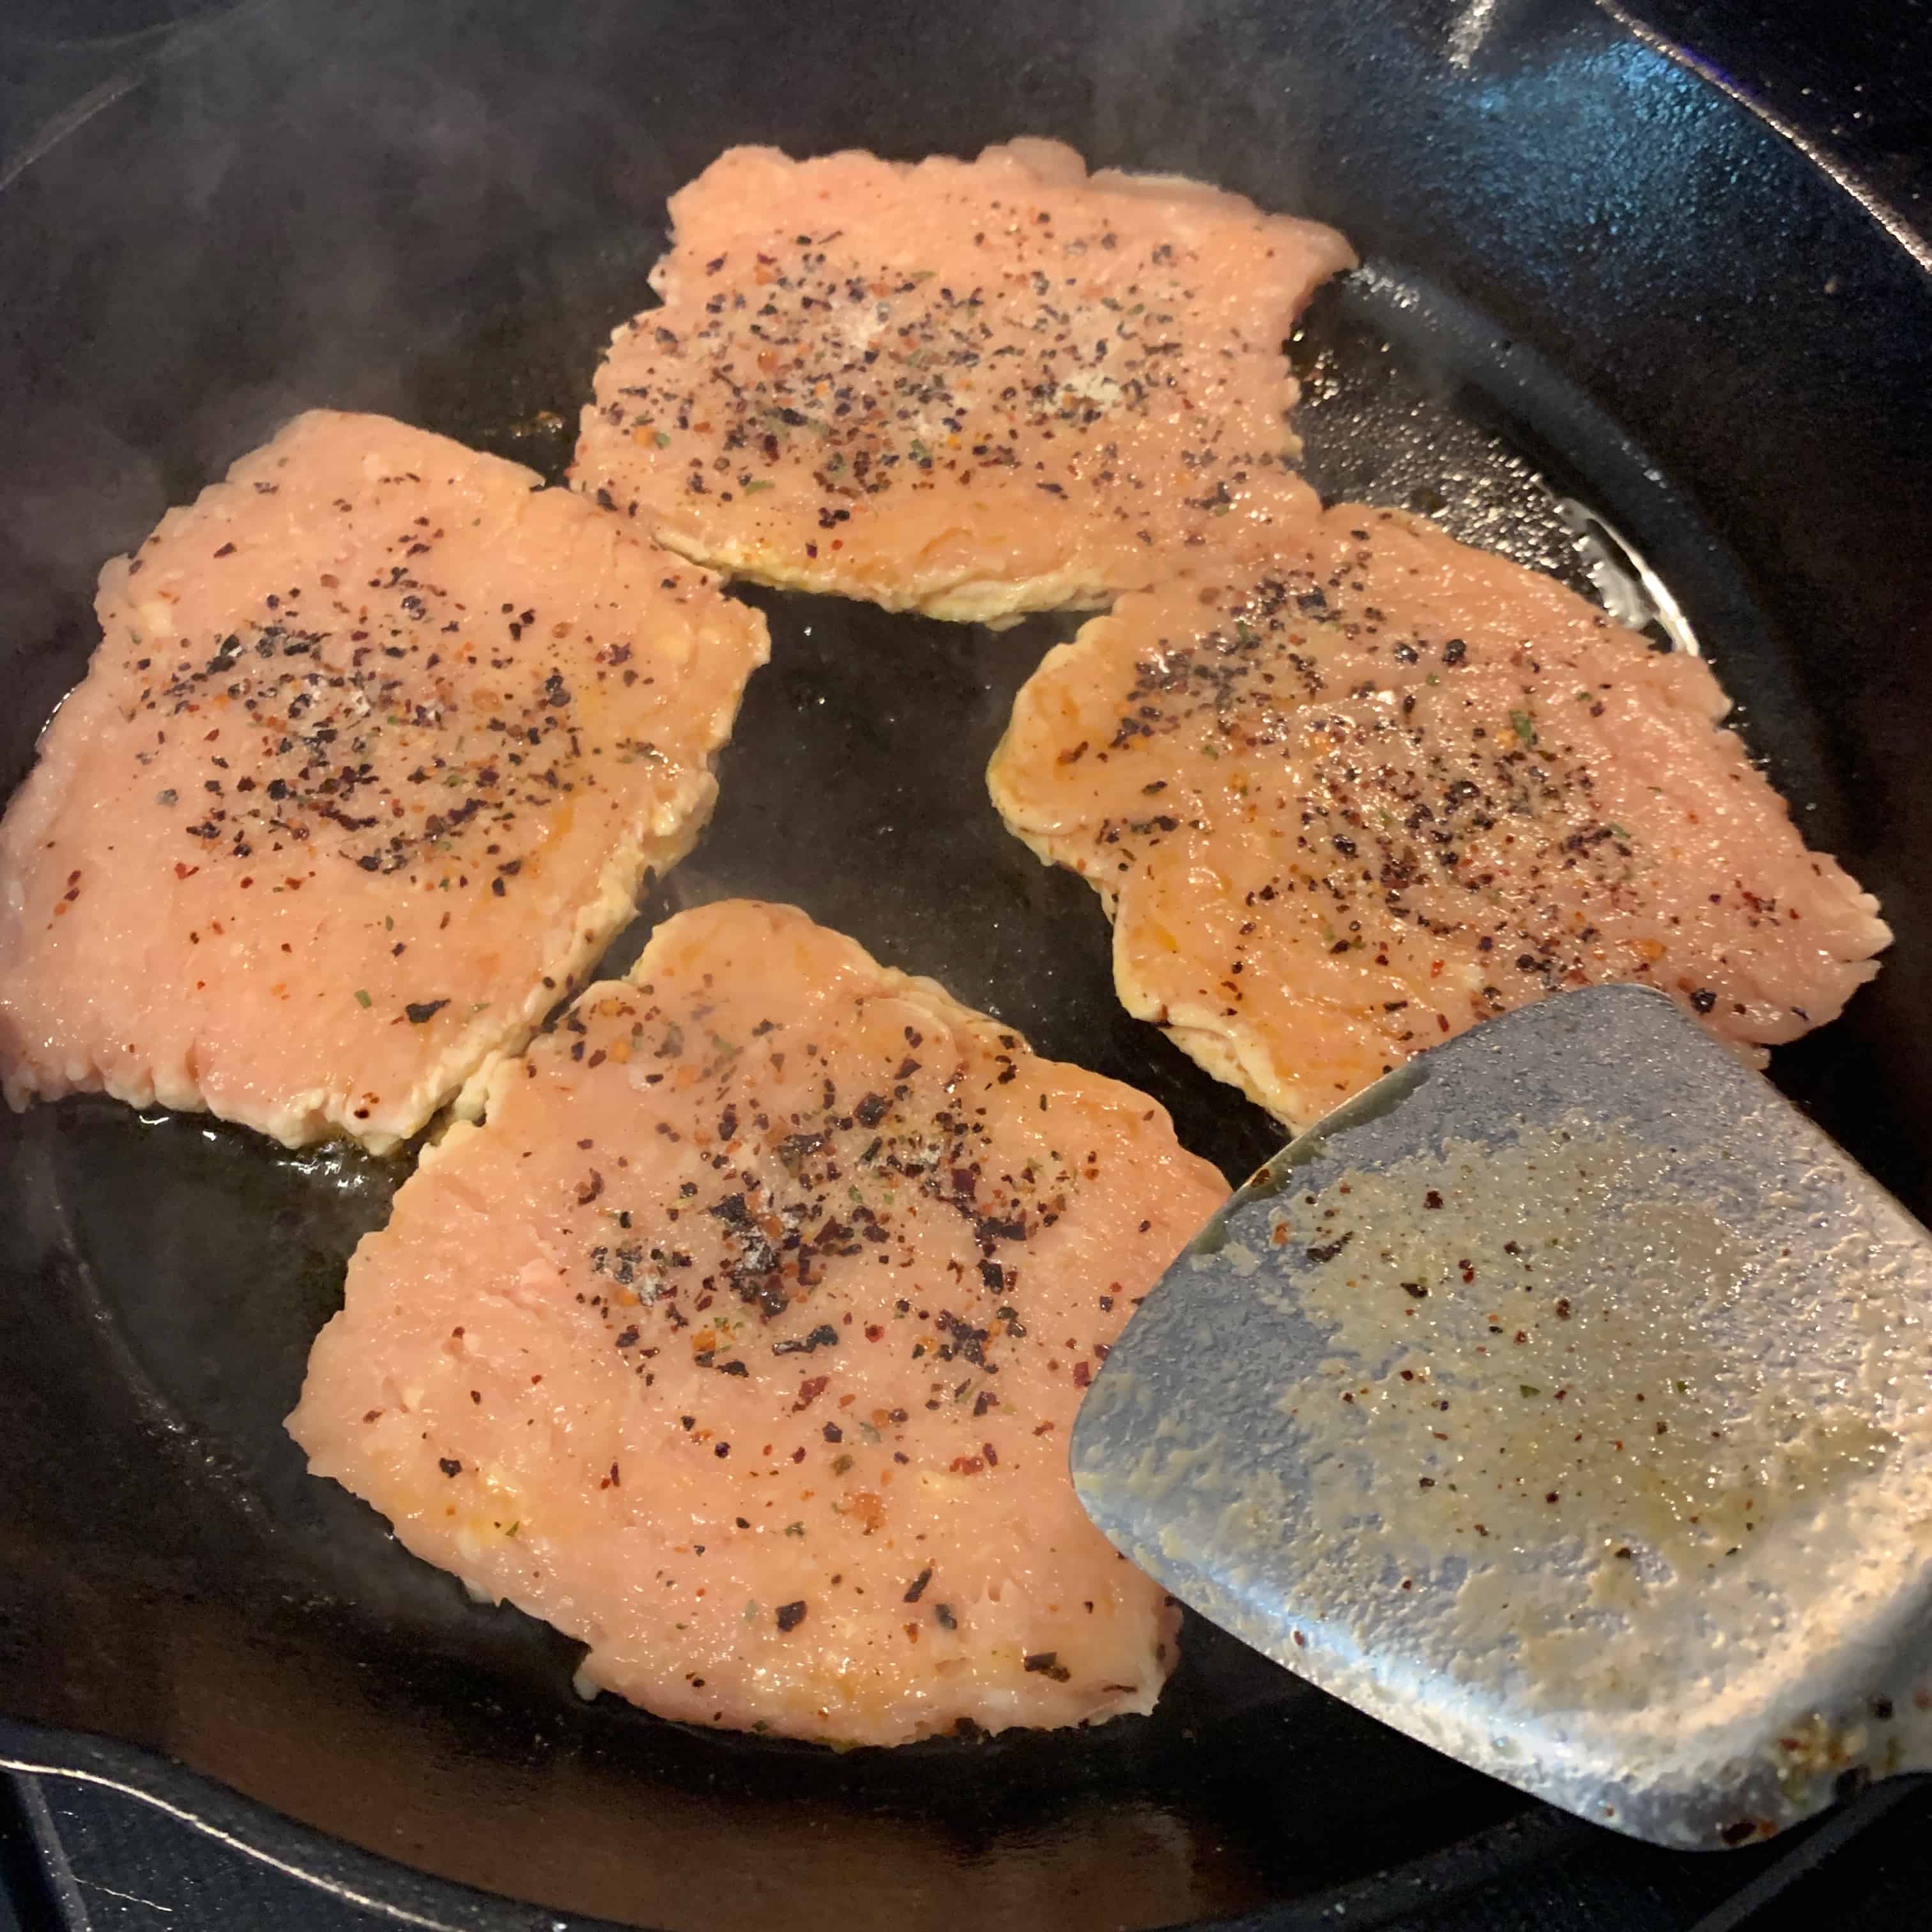 chicken burgers after pressing flat in the skillet